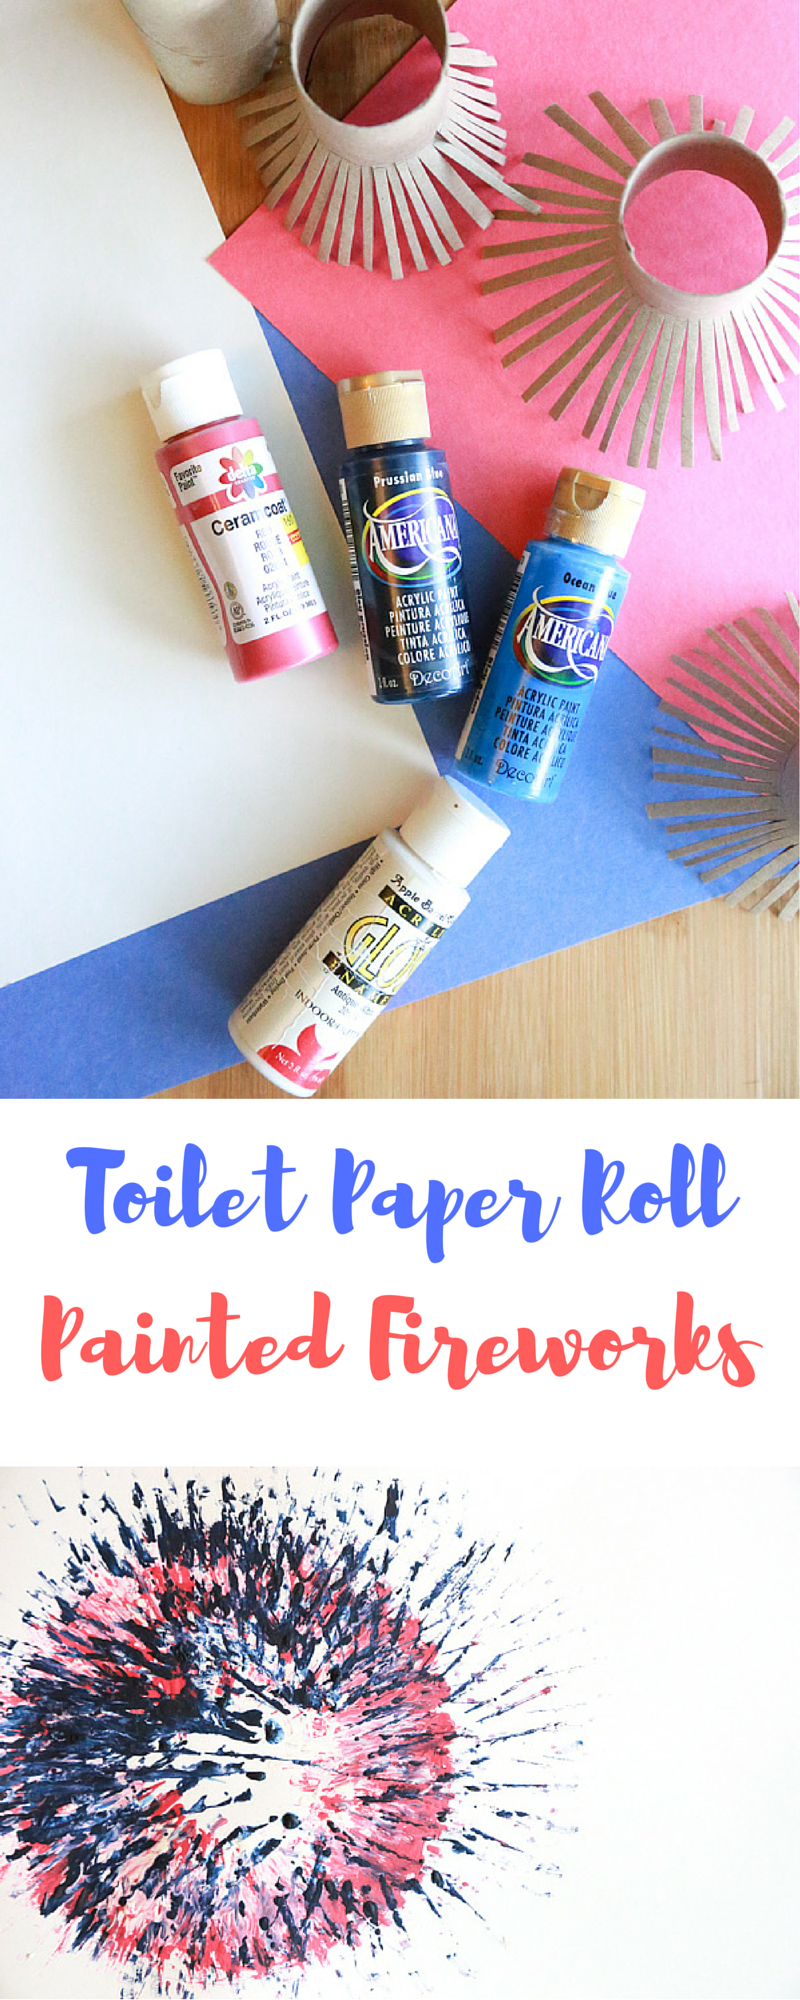 Have some spare time to craft with your kids? Try these Toilet Paper Roll Painted Fireworks to celebrate Independence Day.